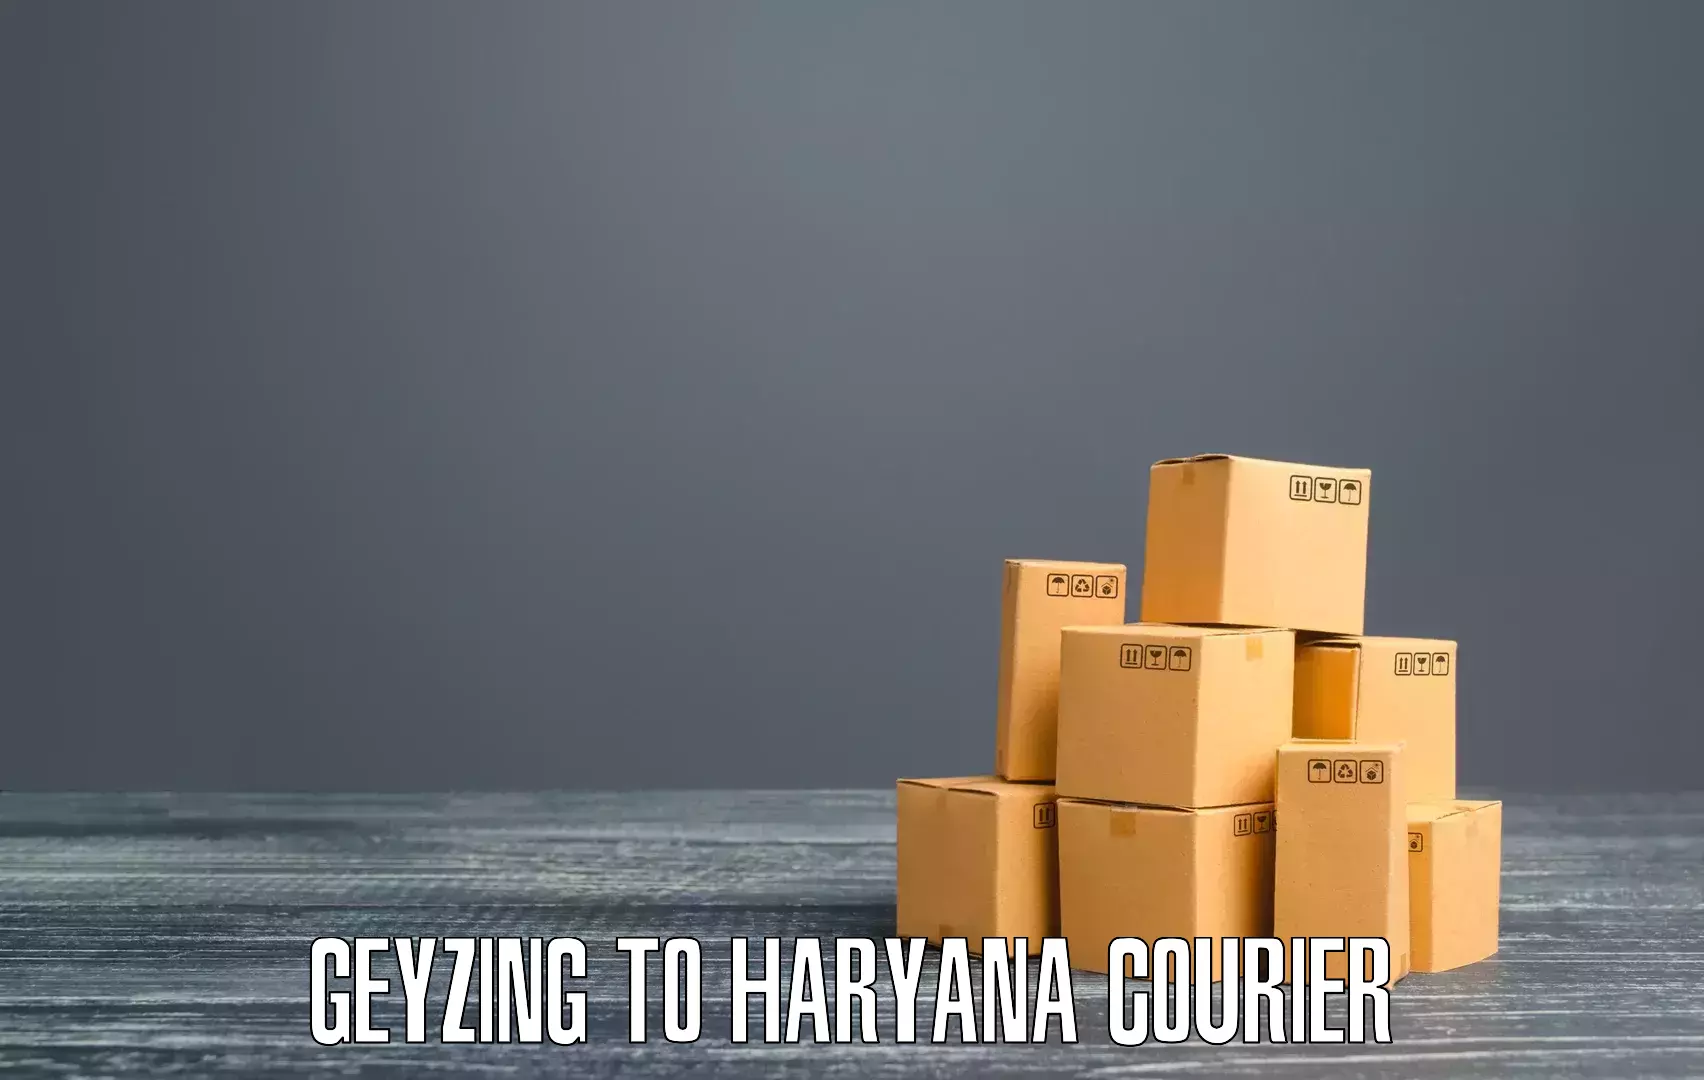 Express package services Geyzing to Haryana